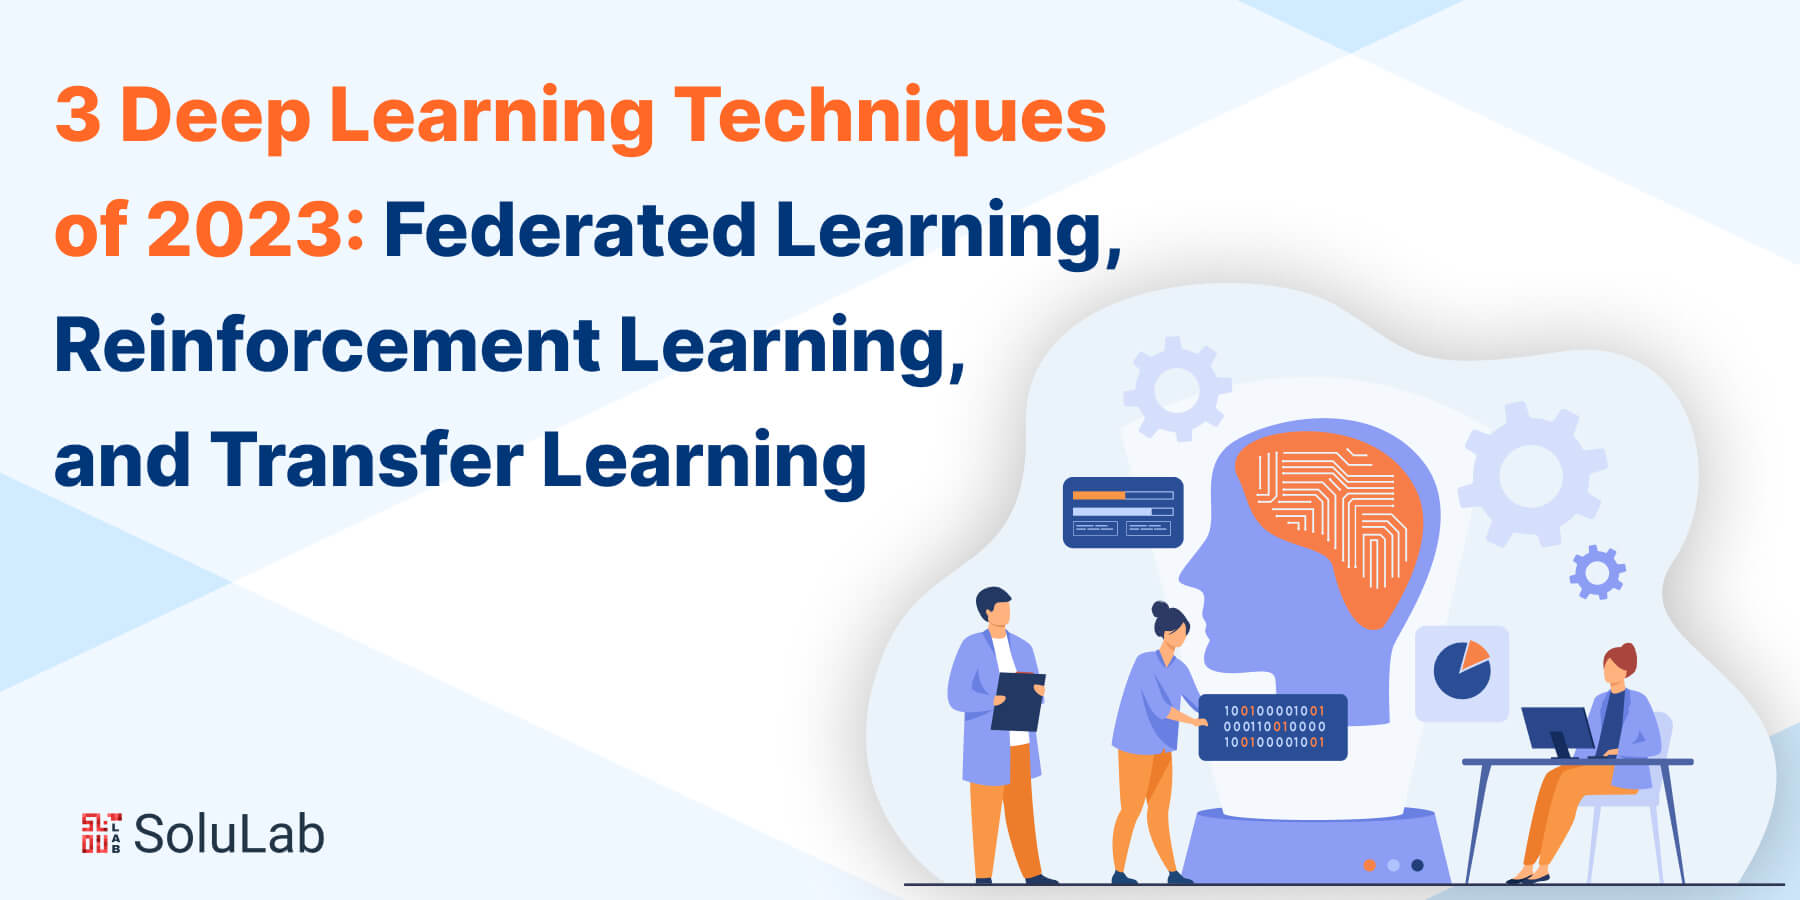 3 Deep Learning Techniques of 2023: Federated Learning, Reinforcement Learning, and Transfer Learning